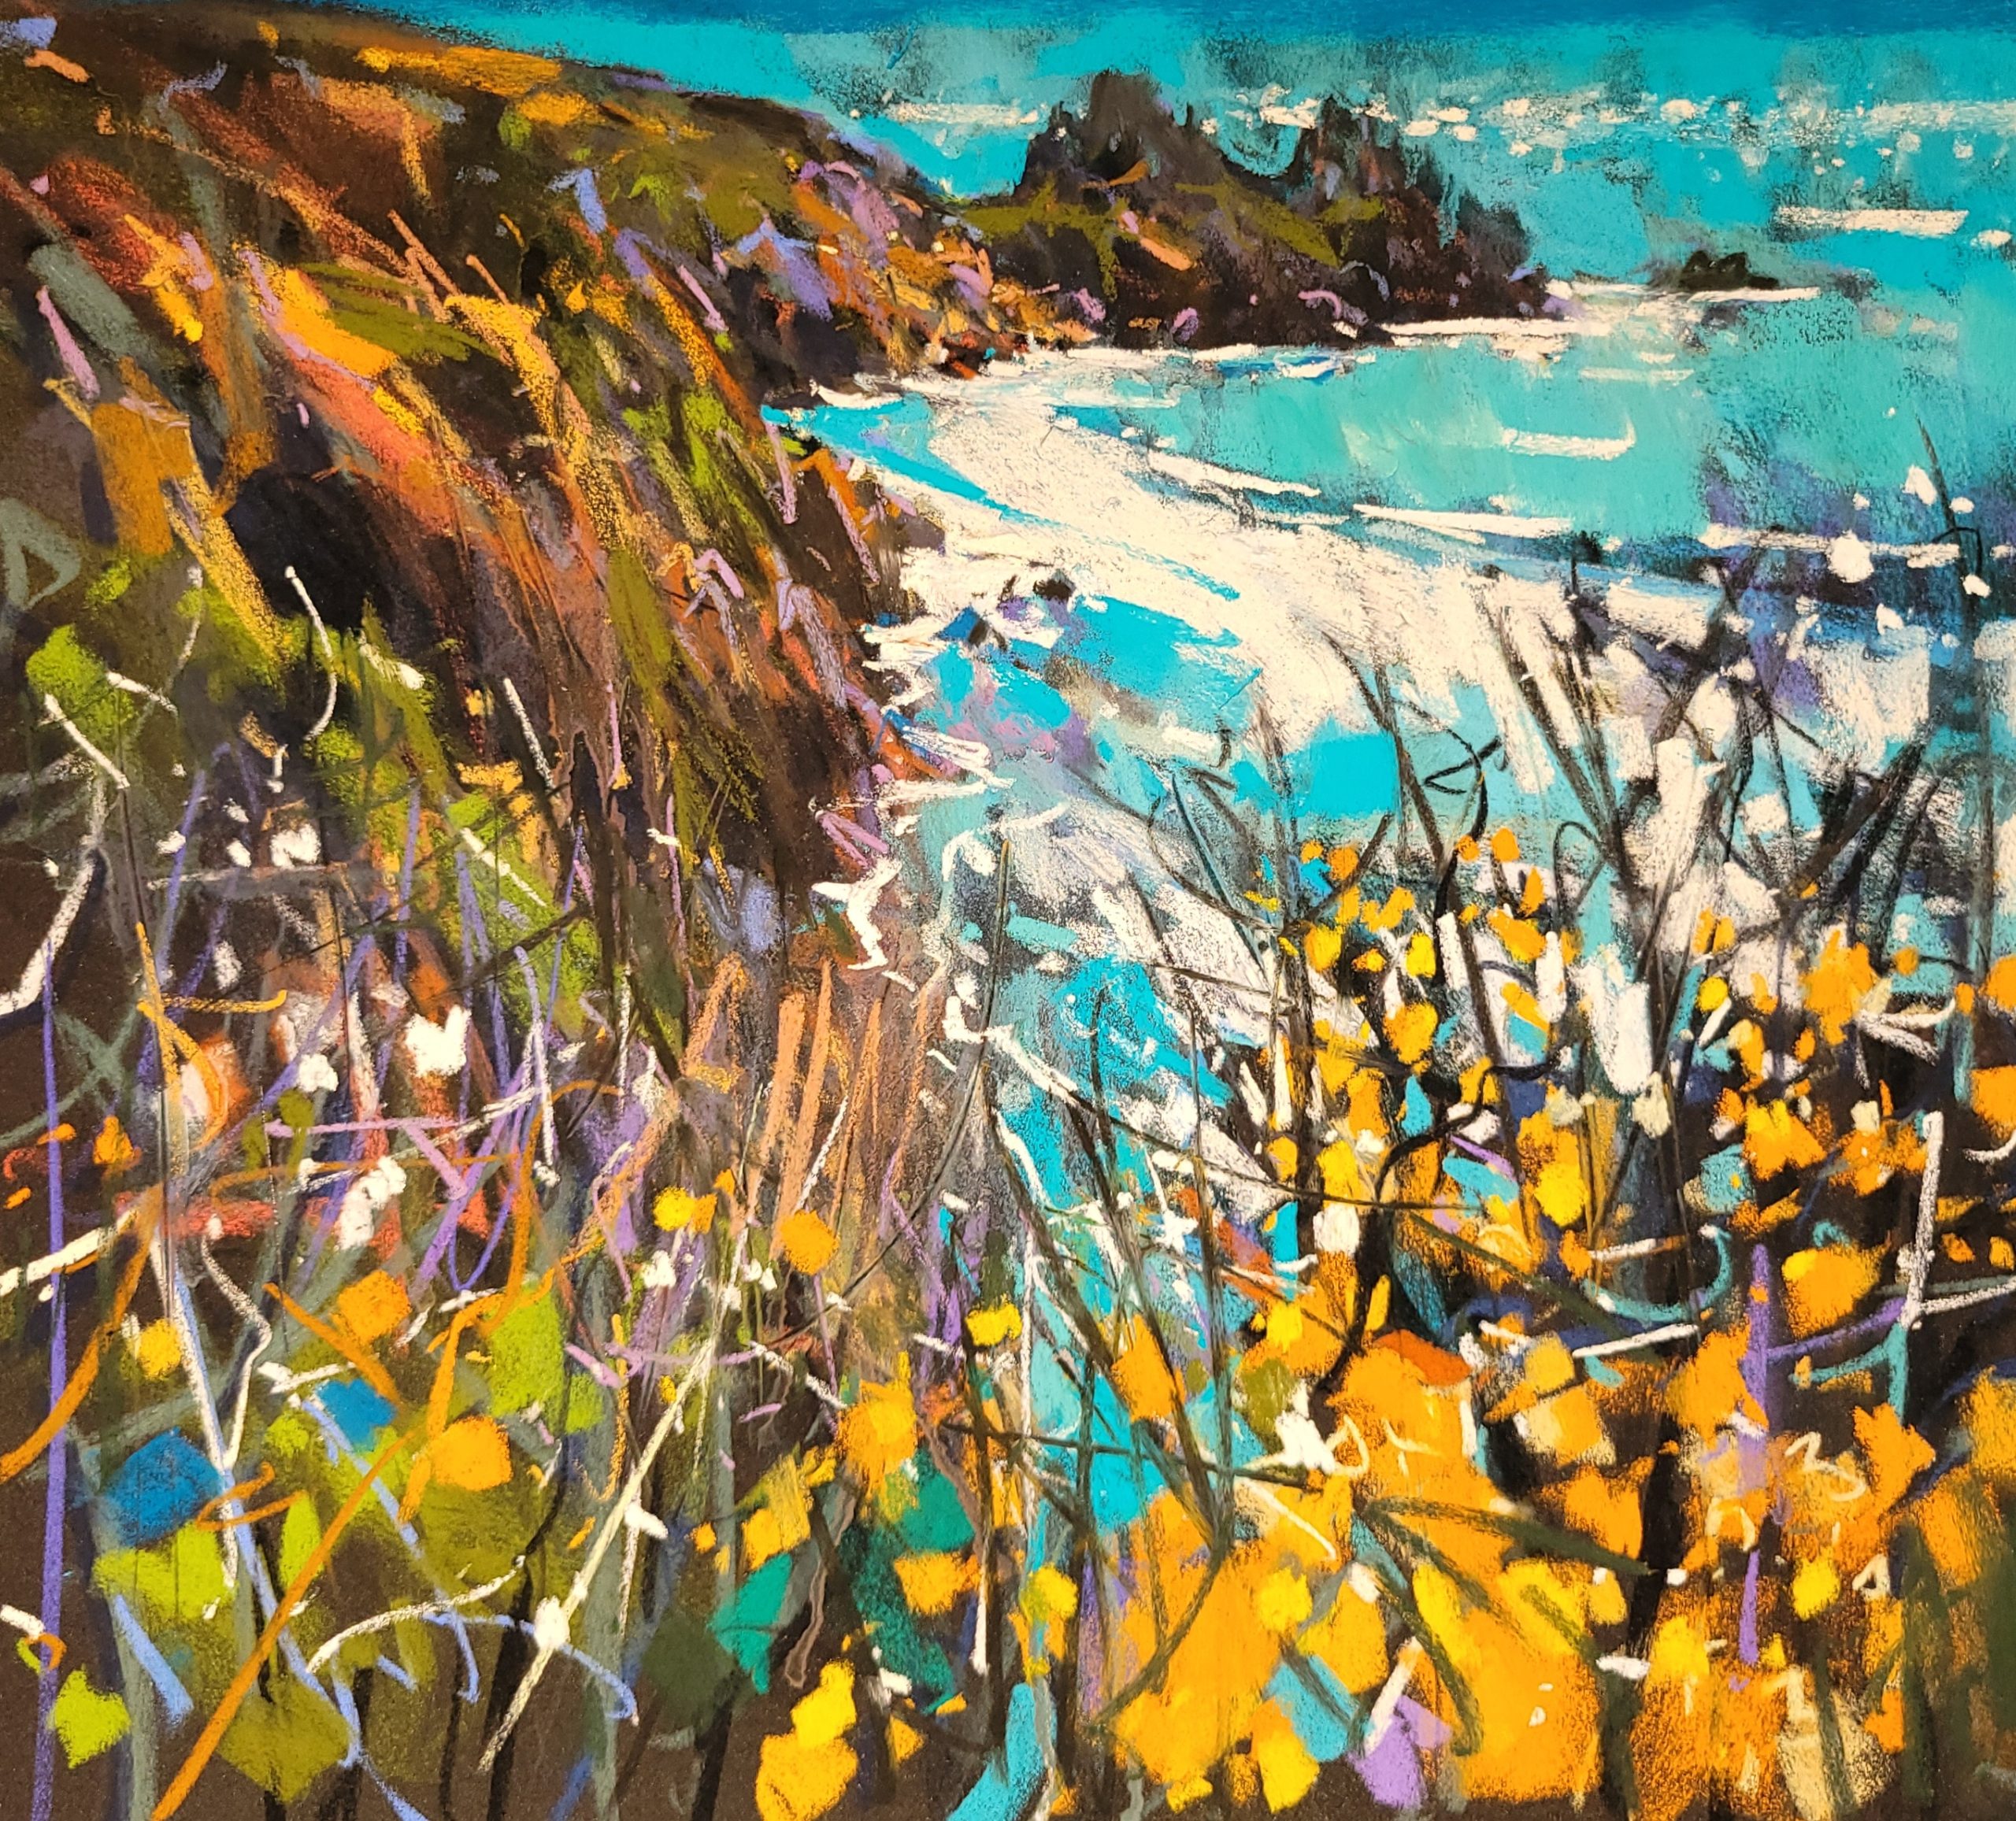 Richard Suckling, "Coastal Path Near Porthcurno," mixed pastels on reused Sennelier La Carte Pastel Card, 19 x 20 in